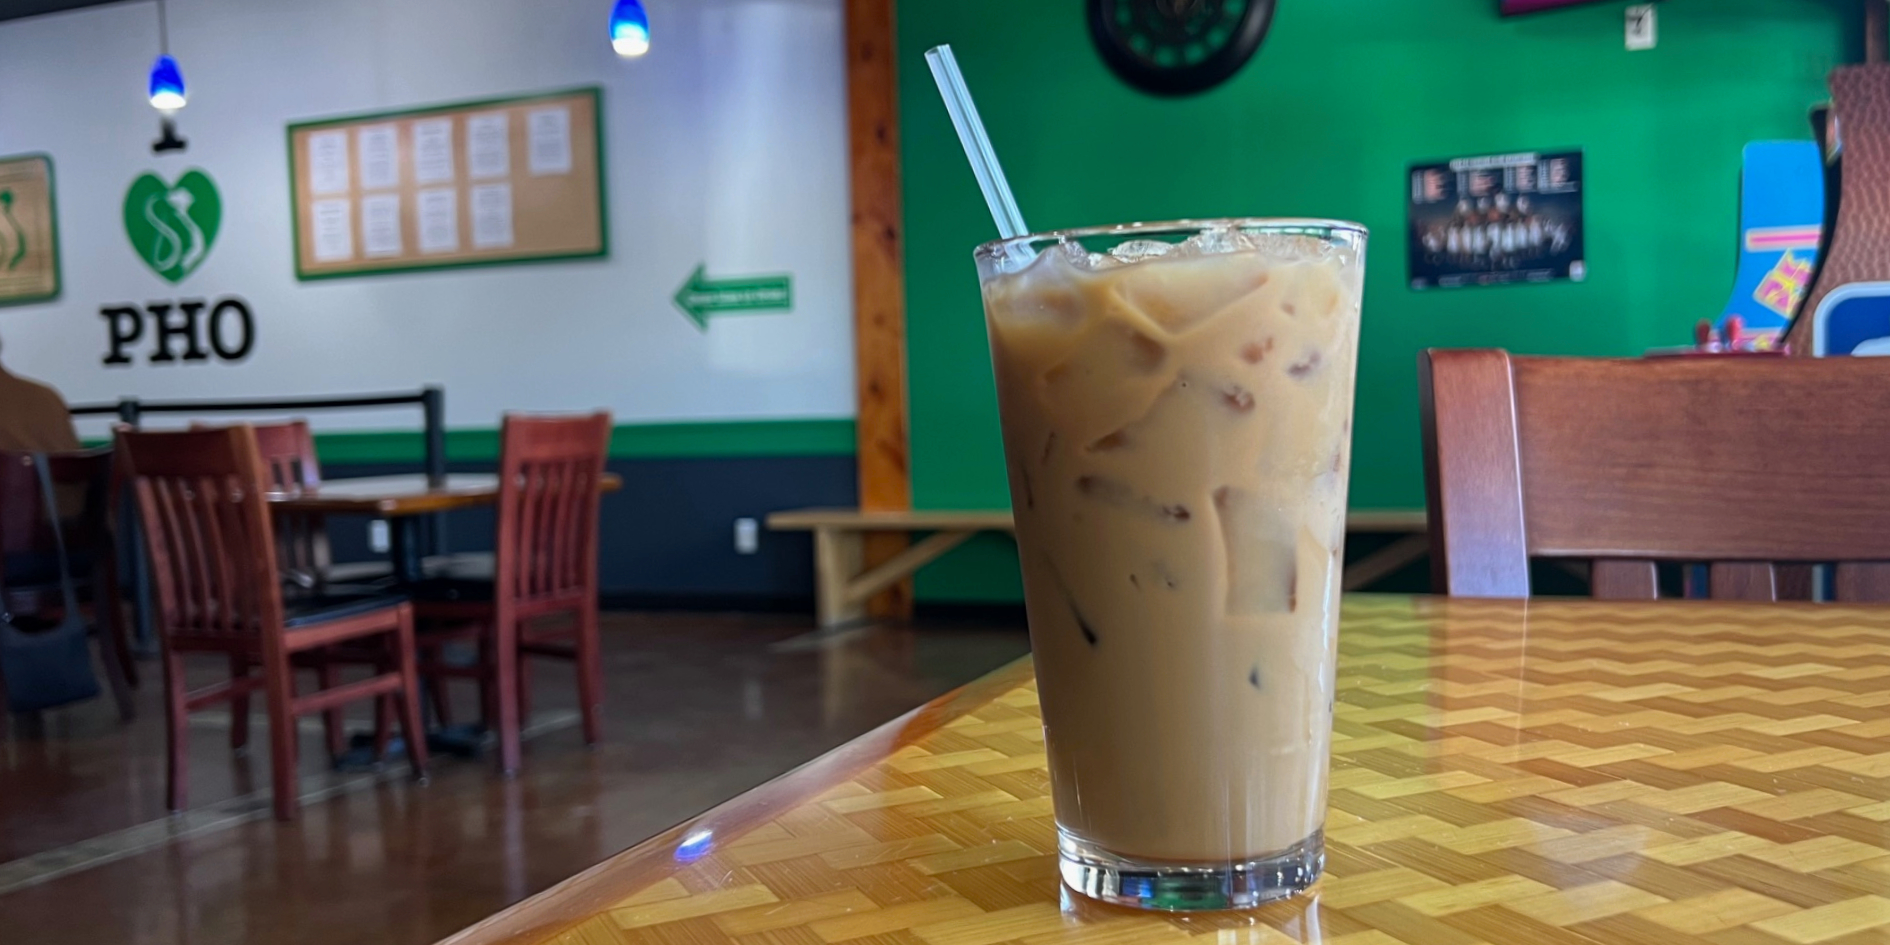 A pint glass has a light brown liquid with big flat square ice cubes and a clear straw. The dining room has a white wall that says "I heart pho" and there is a bright green accent wall to the right.